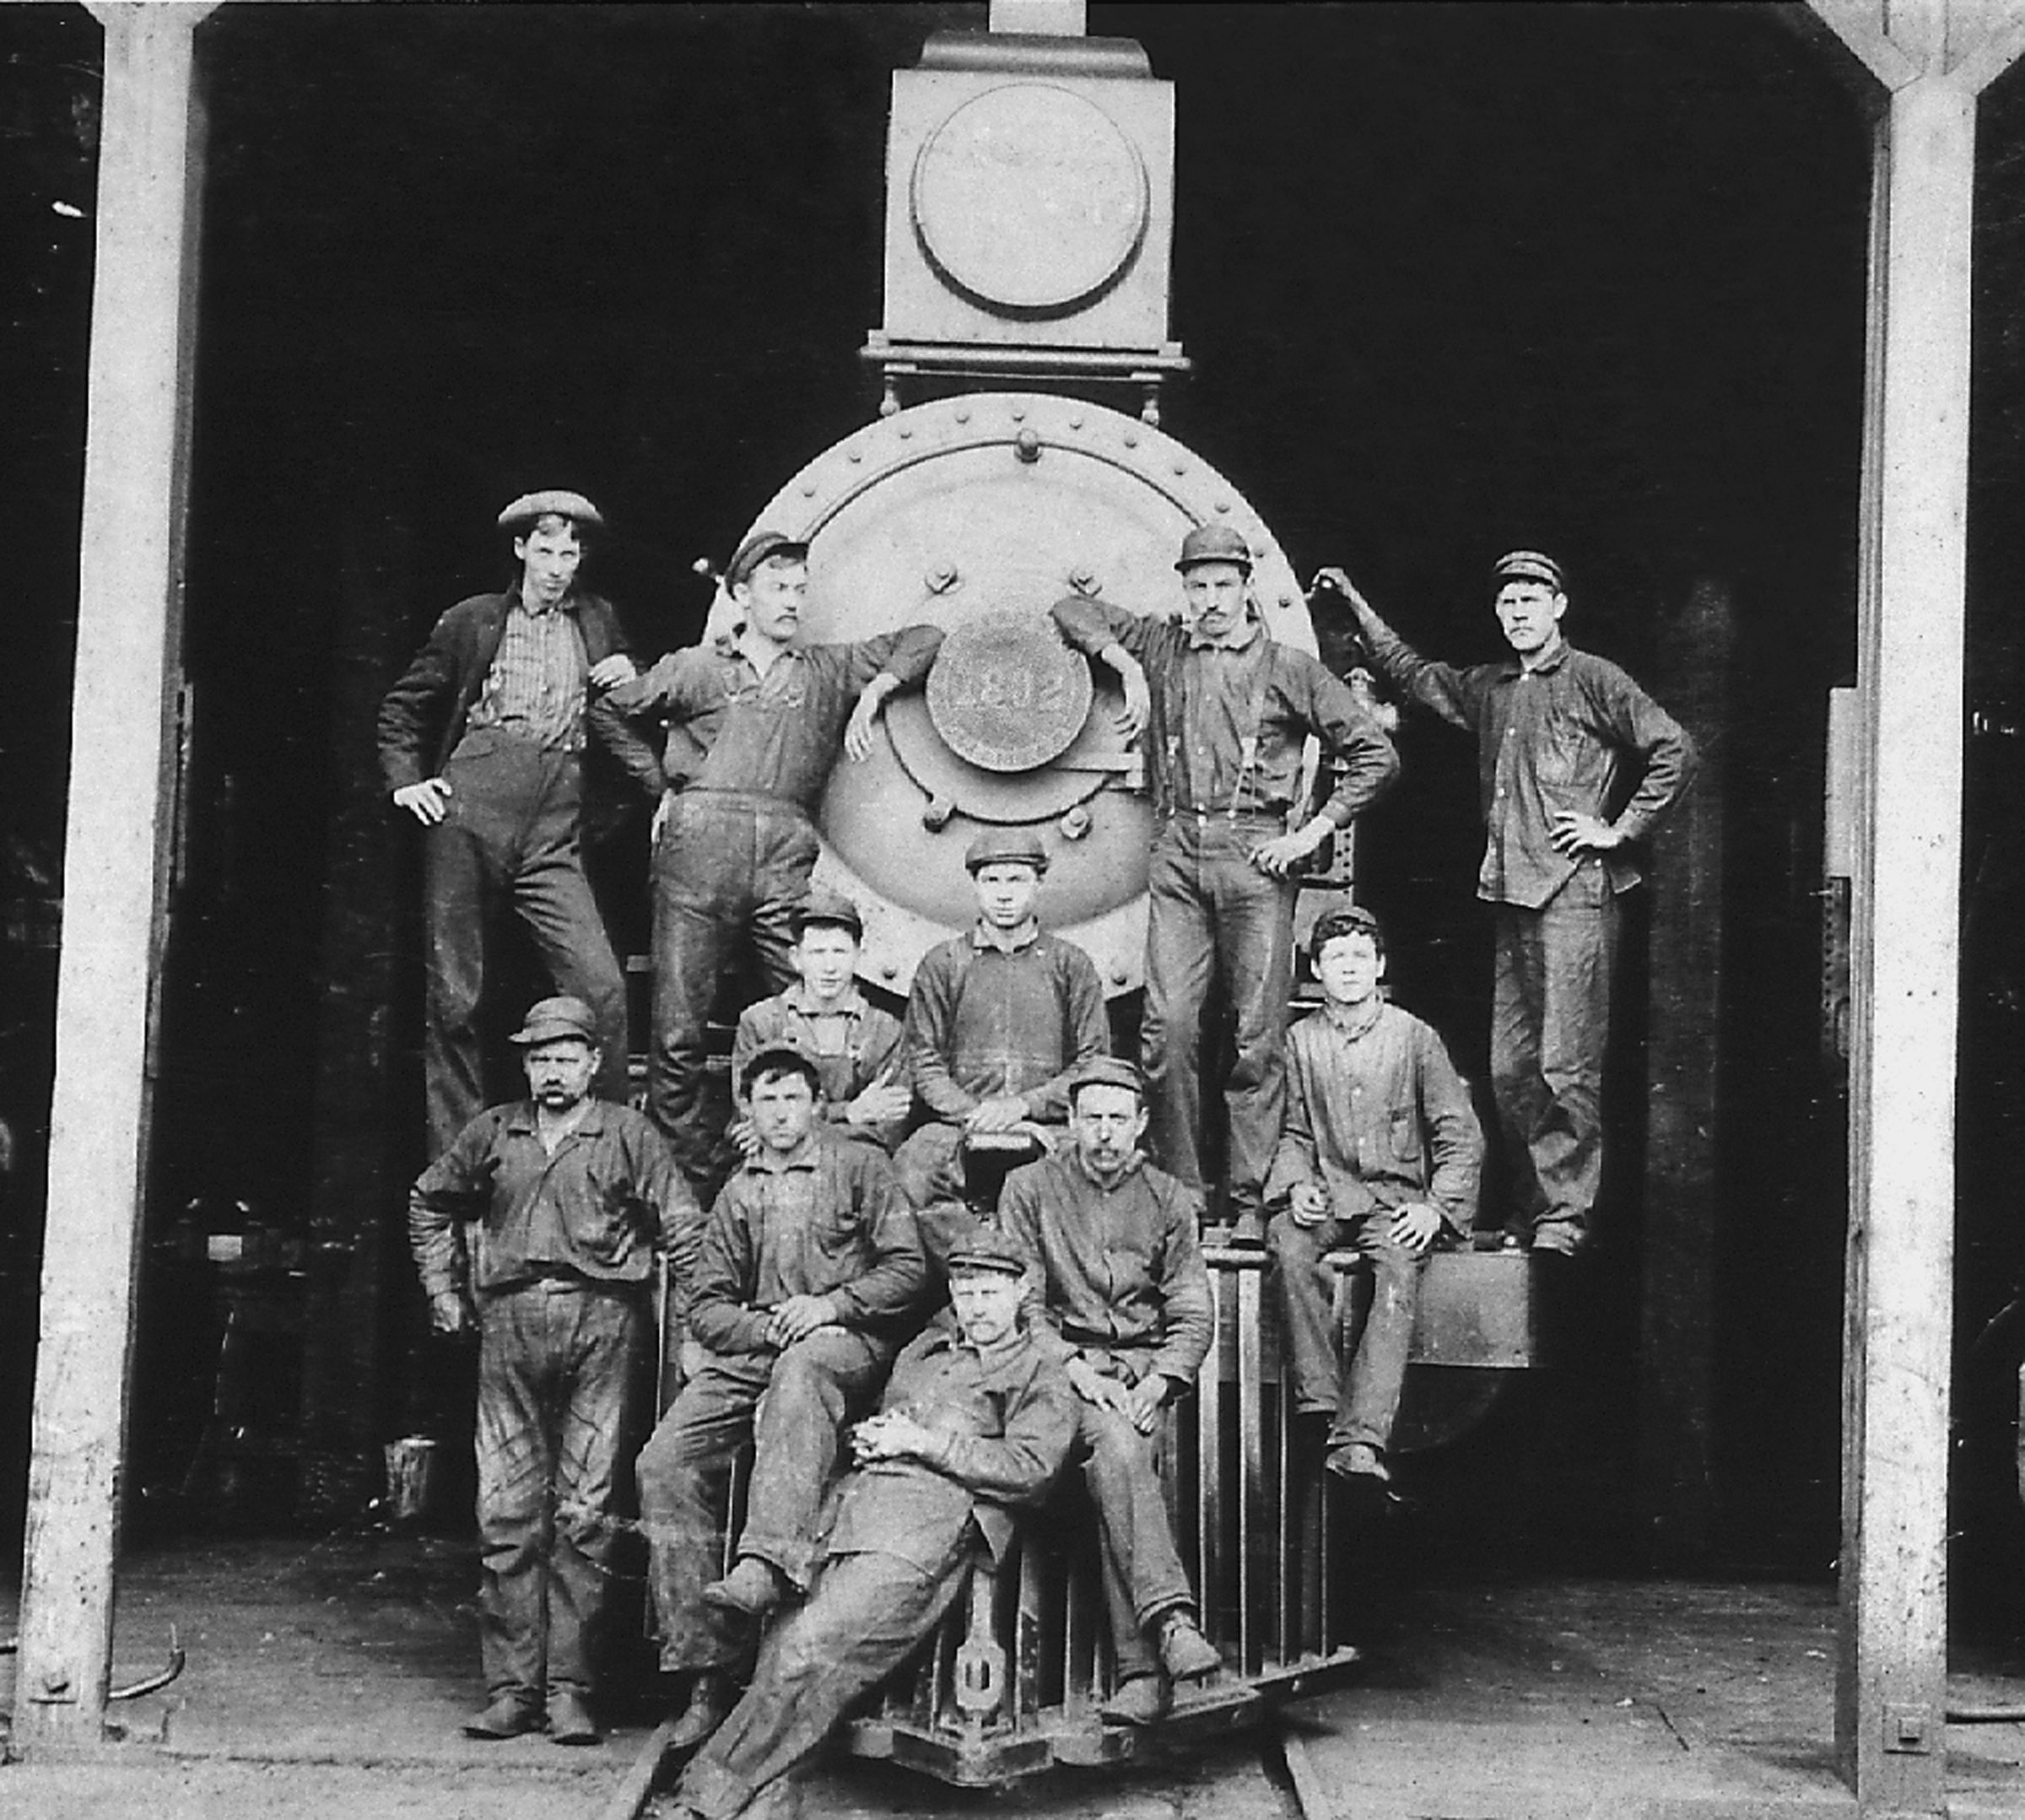 Shop workers at the Southern Pacific Roundhouse